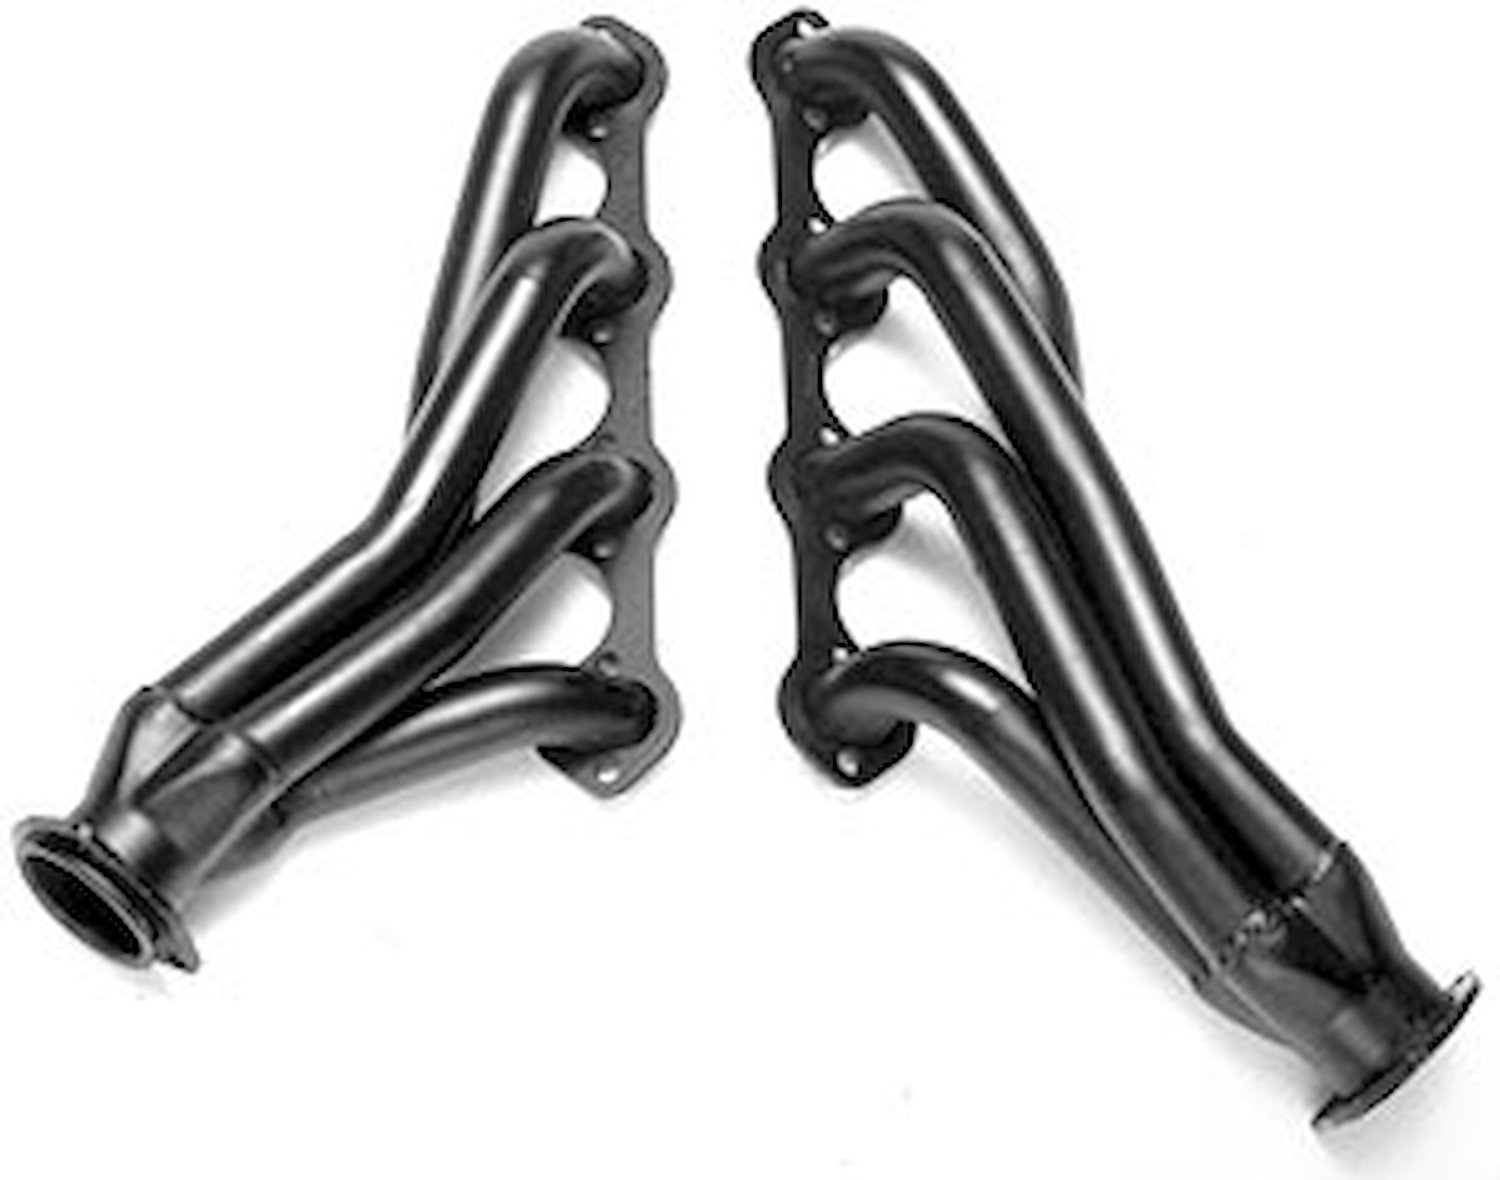 Standard Duty Uncoated Shorty Headers for 1979-93 Mustang 5.0L 302